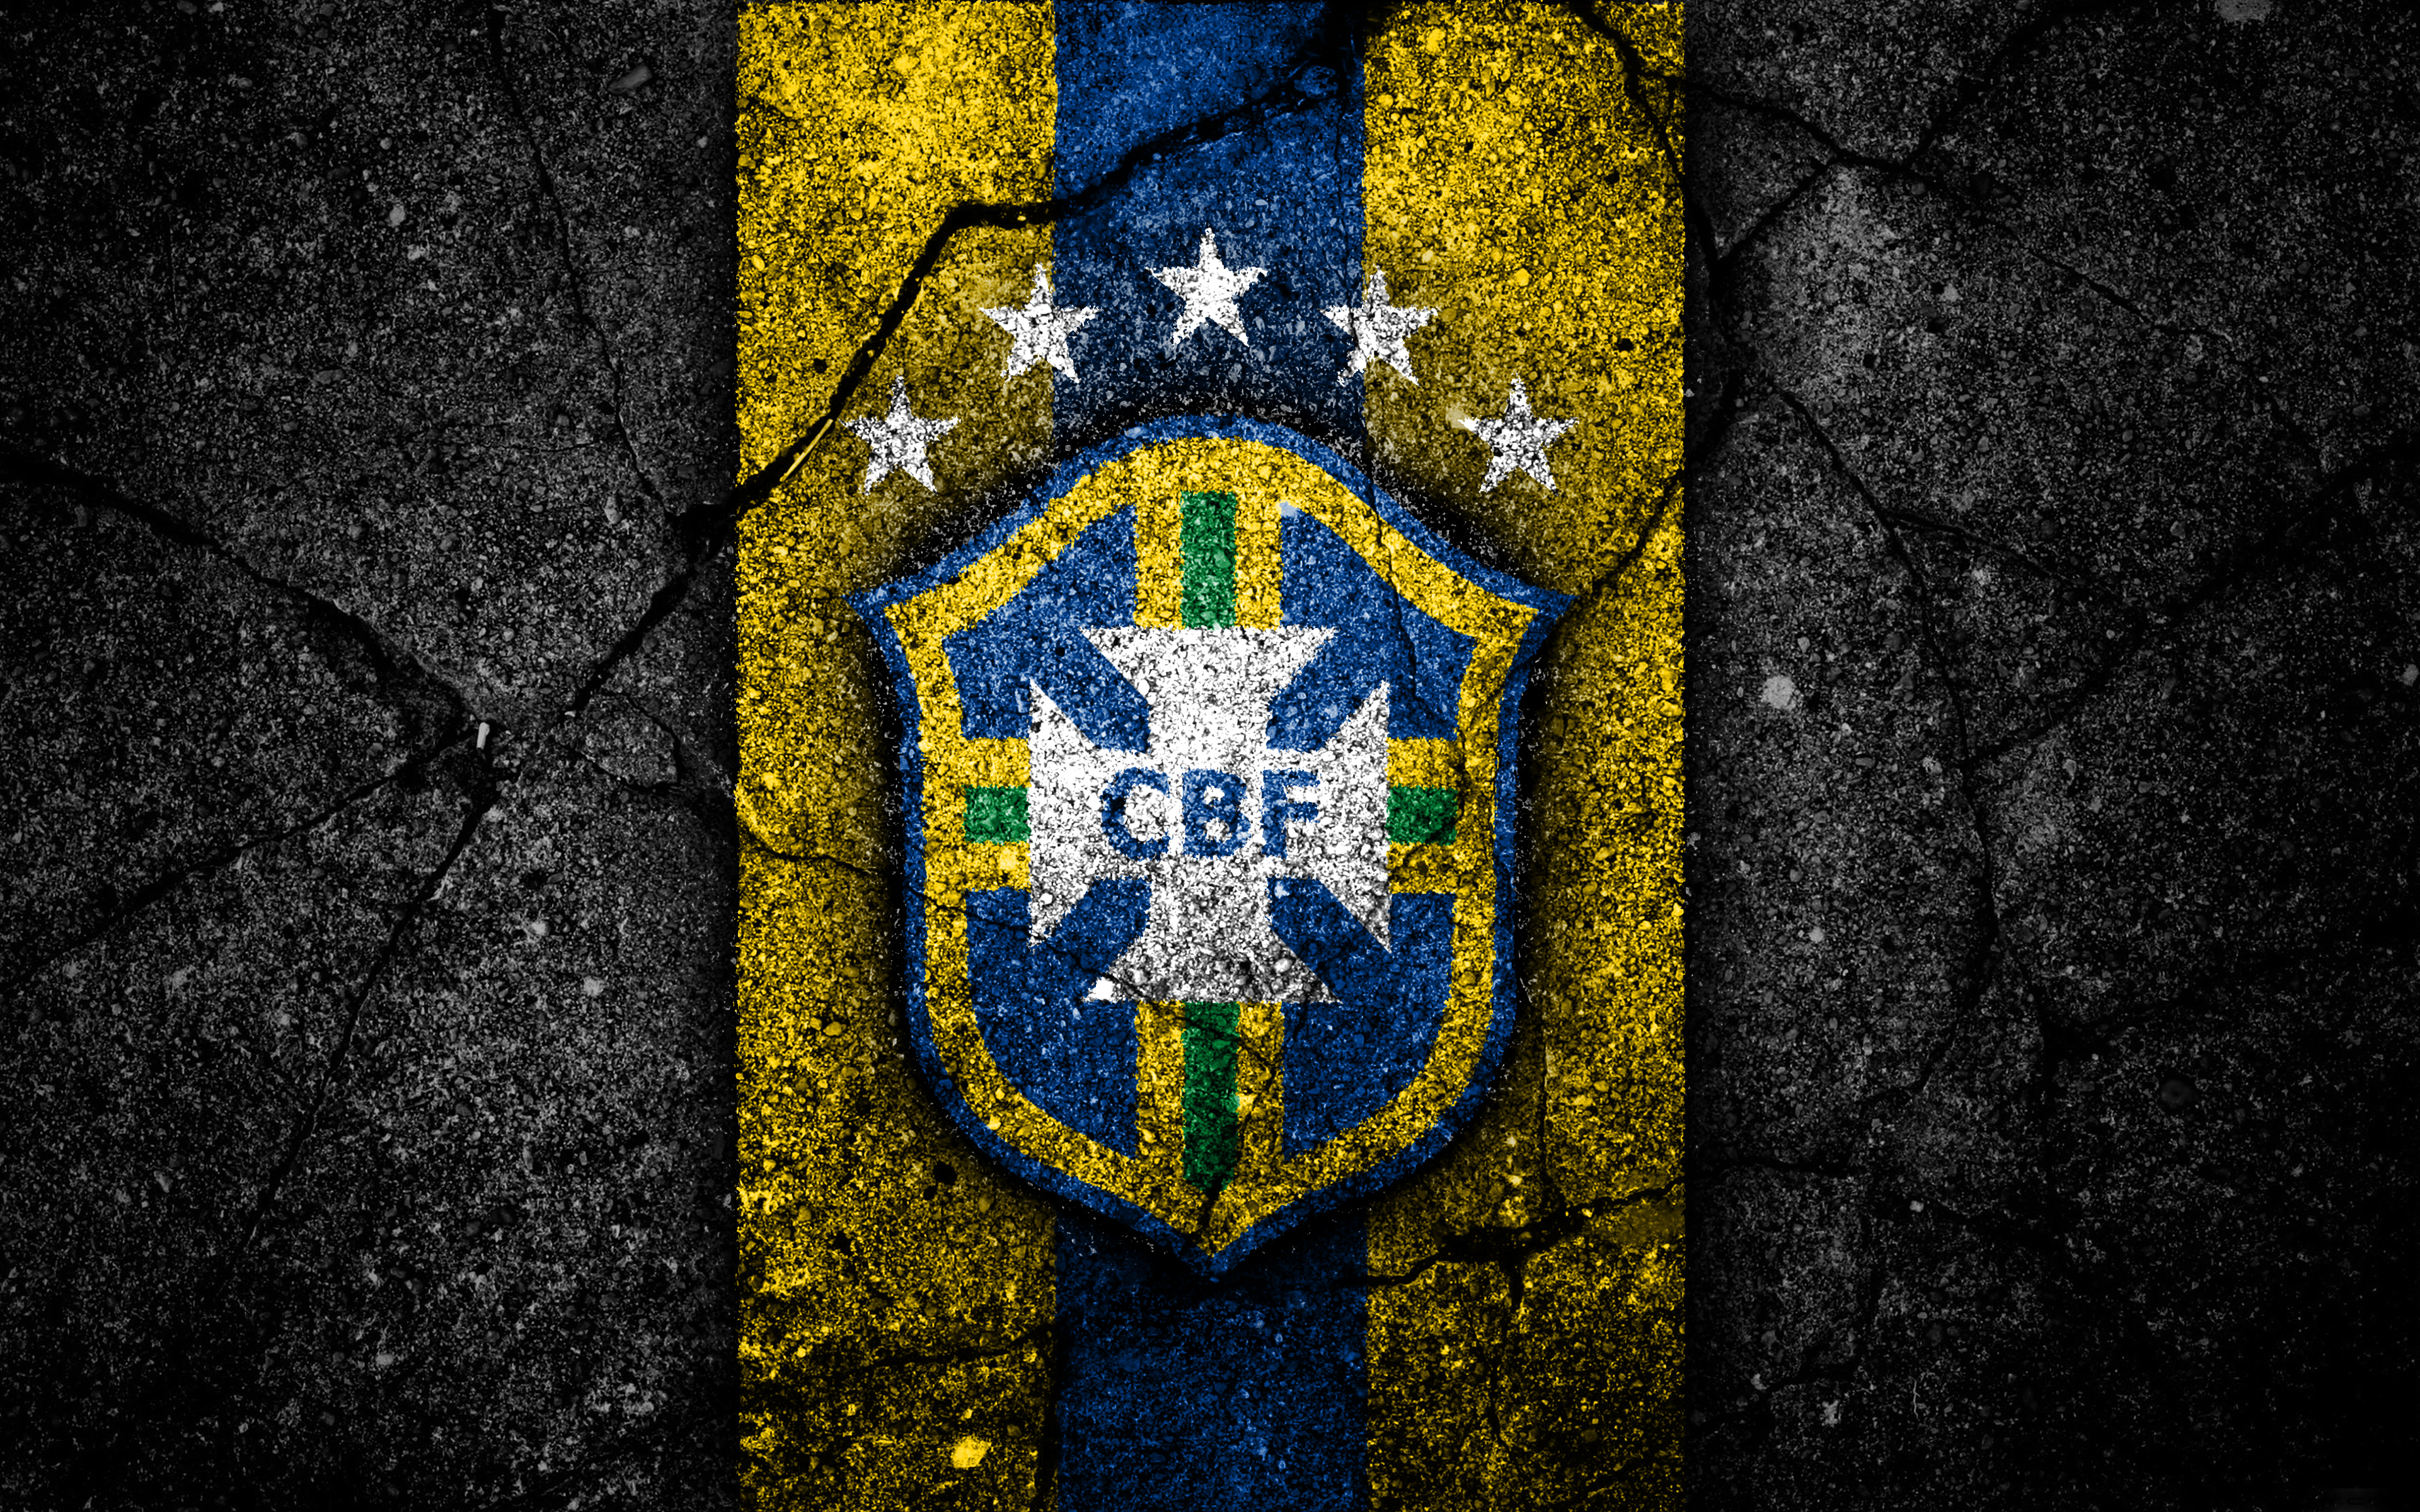 Download wallpapers I love Brazil, 4K, wooden carving hands, Day of Brazil,  brazilian flag, Flag of Brazil, Take care Brazil, creative, Brazil flag,  Brazil flag in hand, wood carving, South American countries,